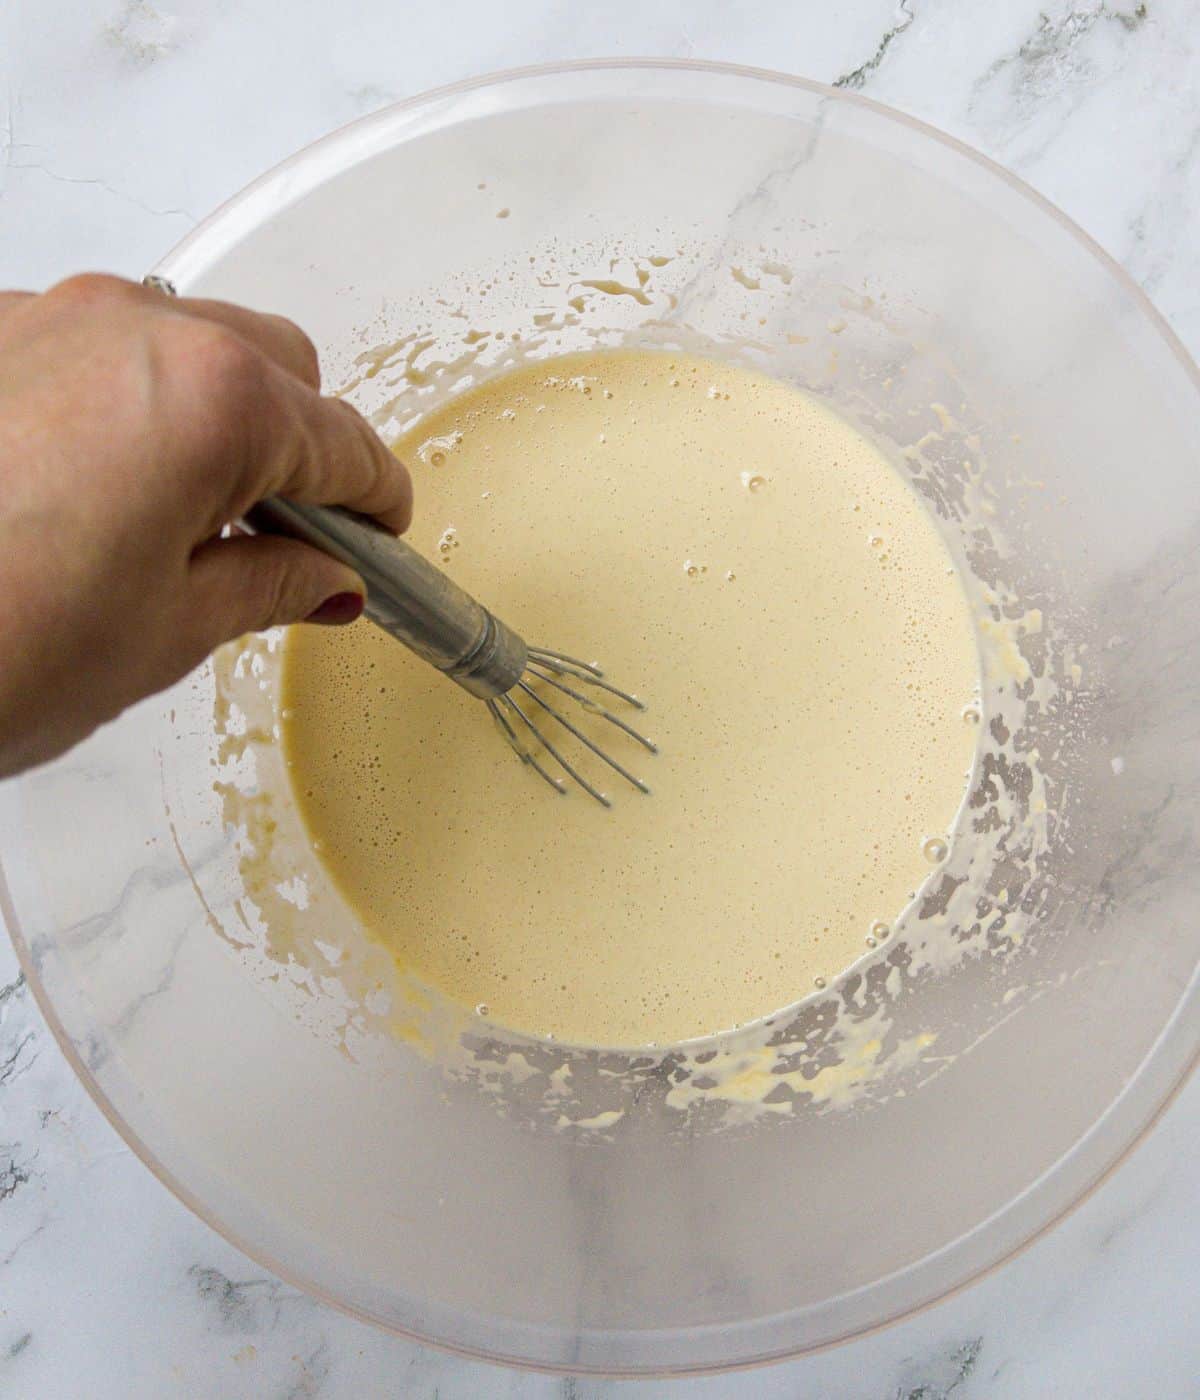 Batter mix for a crepe being whisked in a mixing bowl.